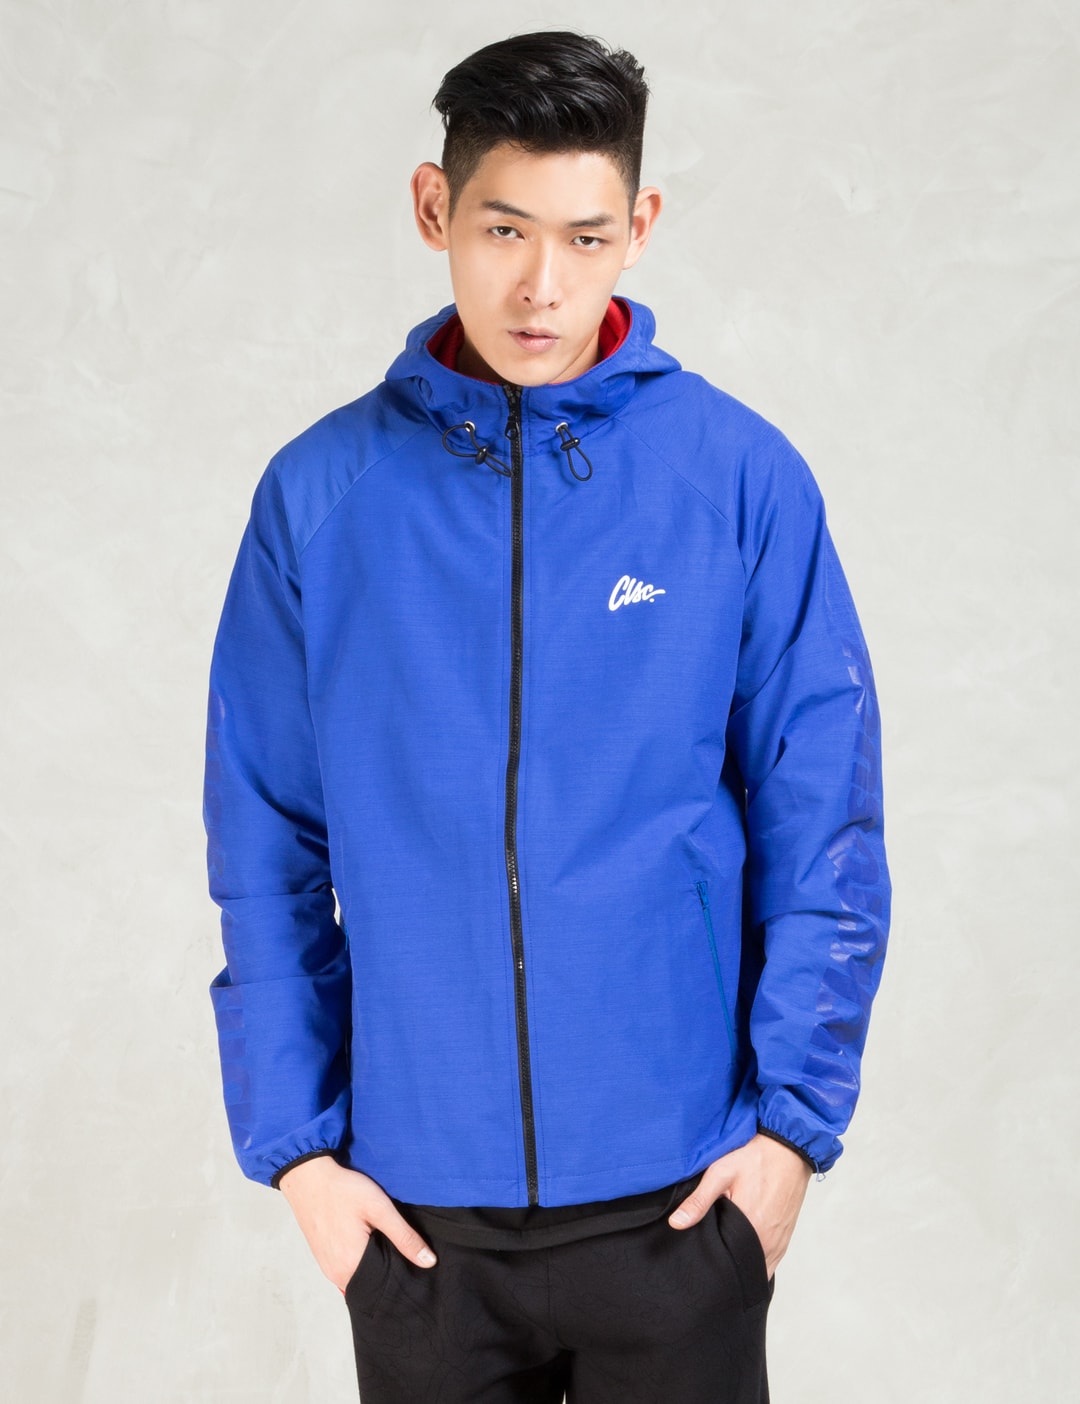 Clsc - Blue Whiskey Wind Breaker | HBX - Globally Curated Fashion and ...